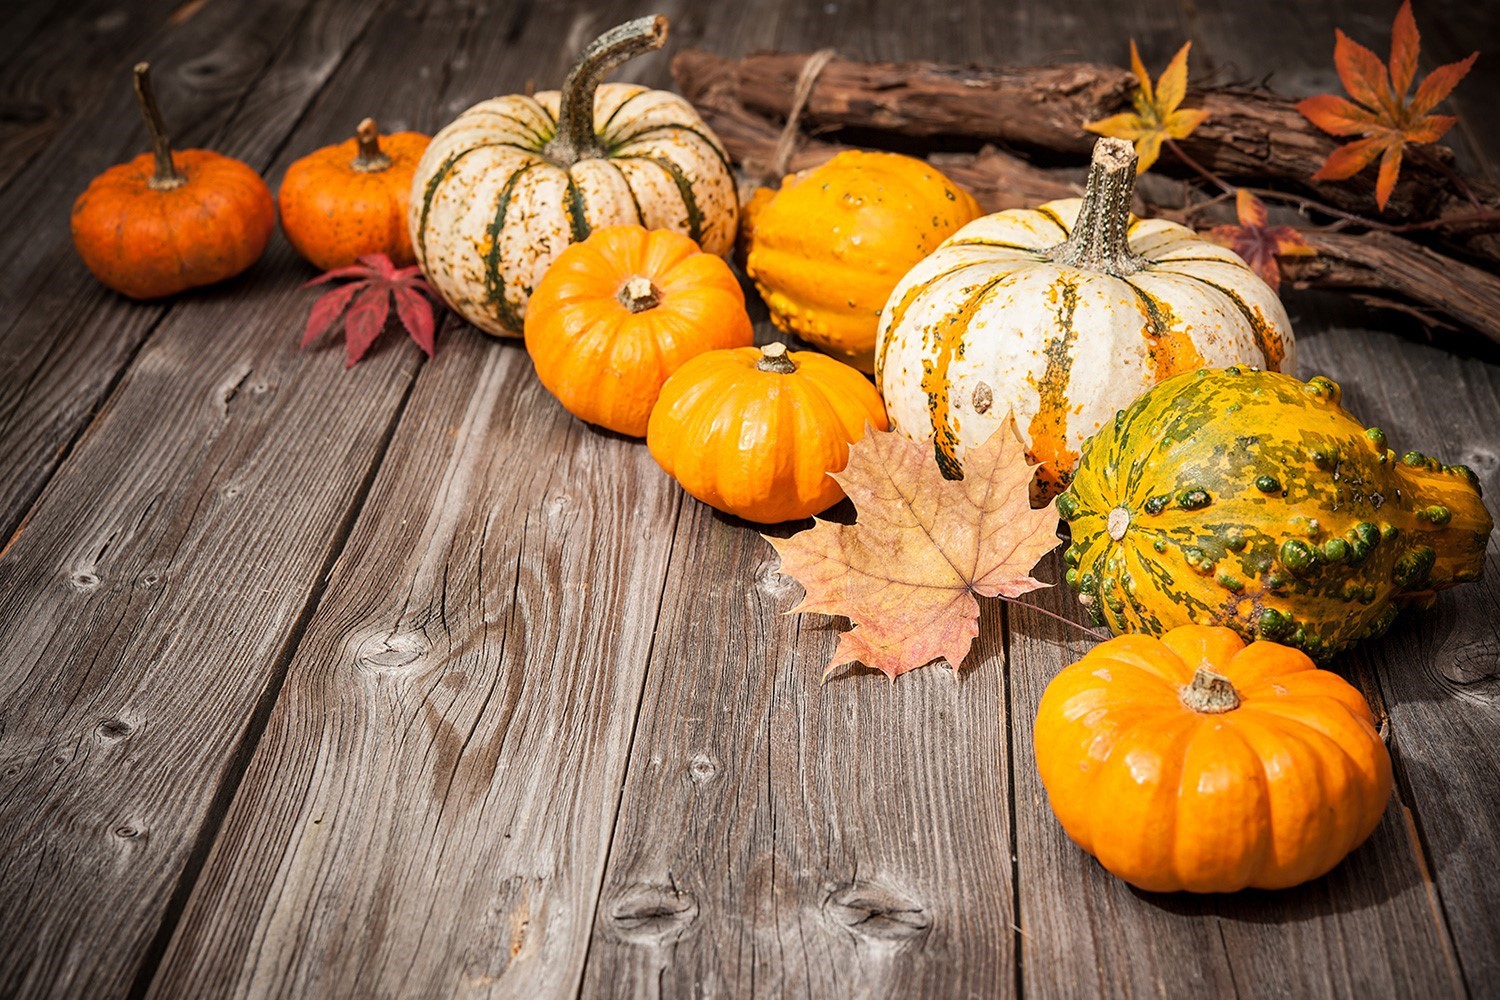 How Can You Eat Pumpkin? Let Us Count the Ways!